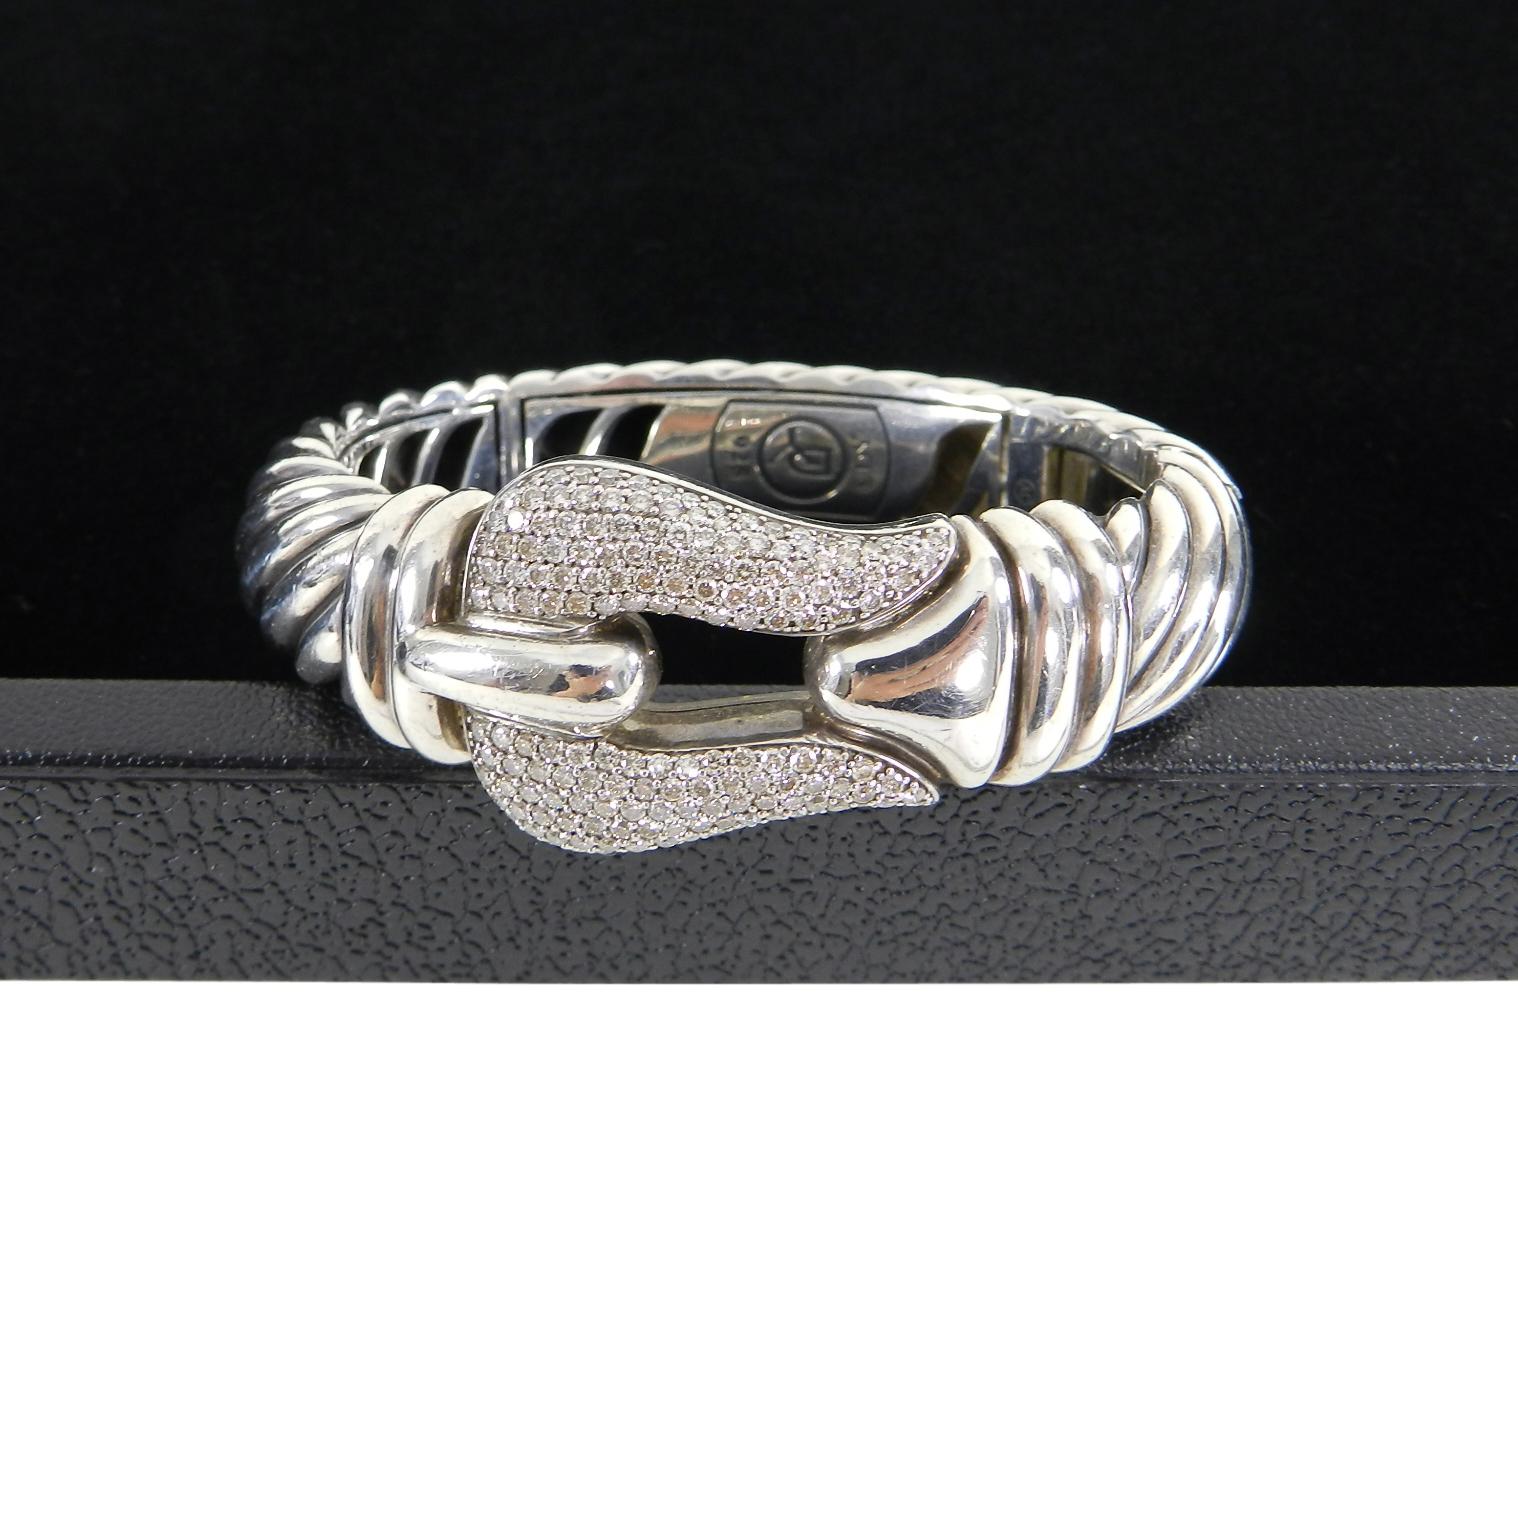 Women's or Men's David Yurman Sterling and Pave Diamond 15mm Cable Buckle Bracelet